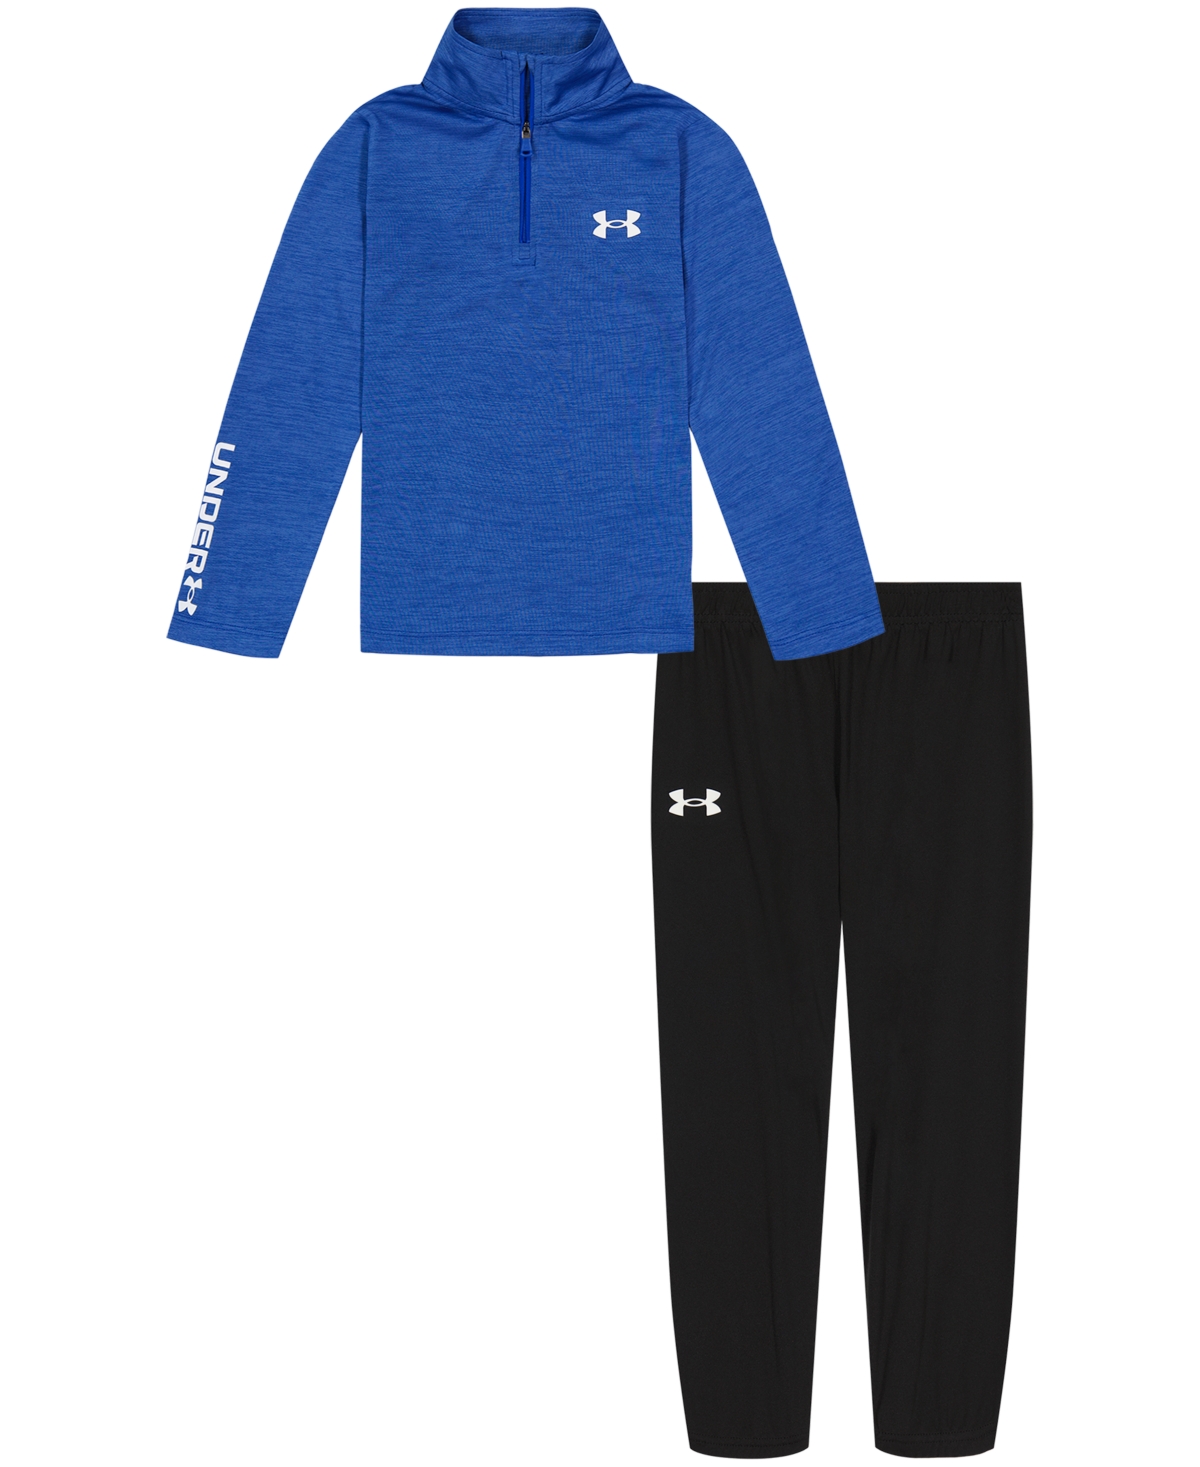 Under Armour Kids' Toddler Boys Branded Quarter Zip Twist Top And Joggers Set In Team Royal